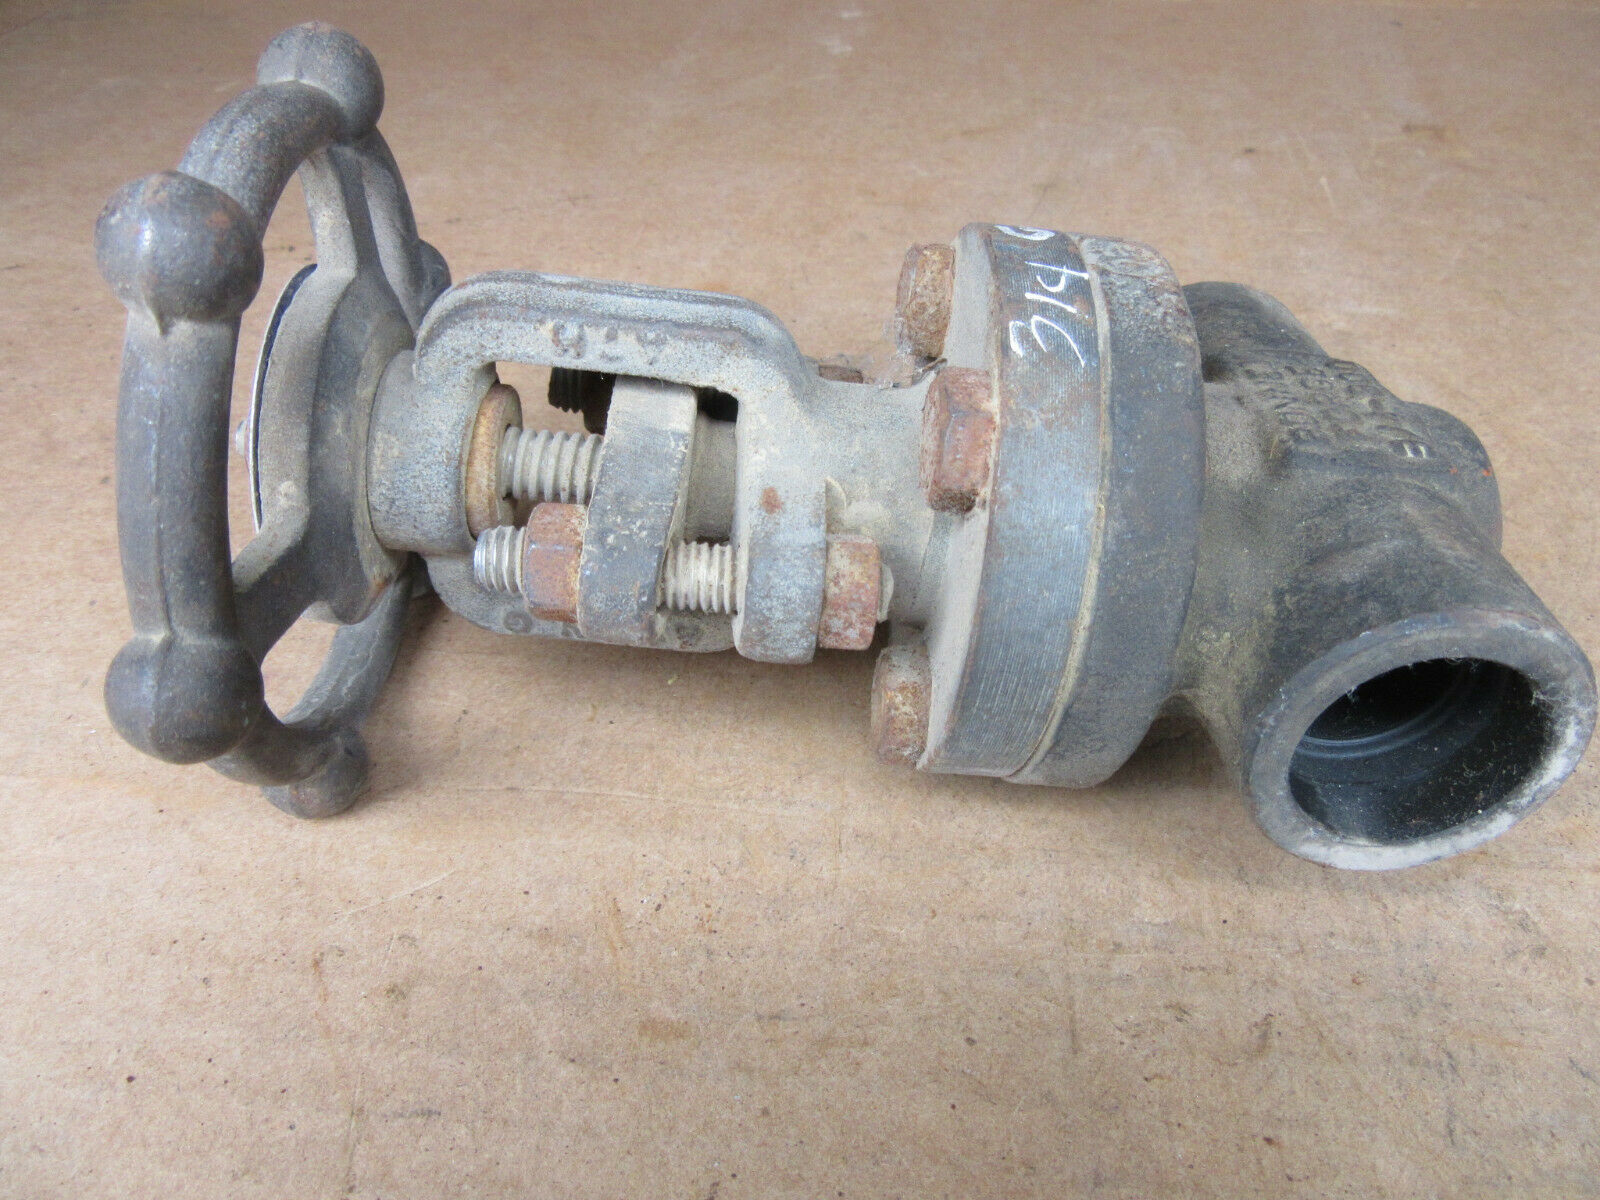 3/4" Weld Gate Valve 800  Bonney Forge  A105n Made In Italy 047691-*005  Hl11